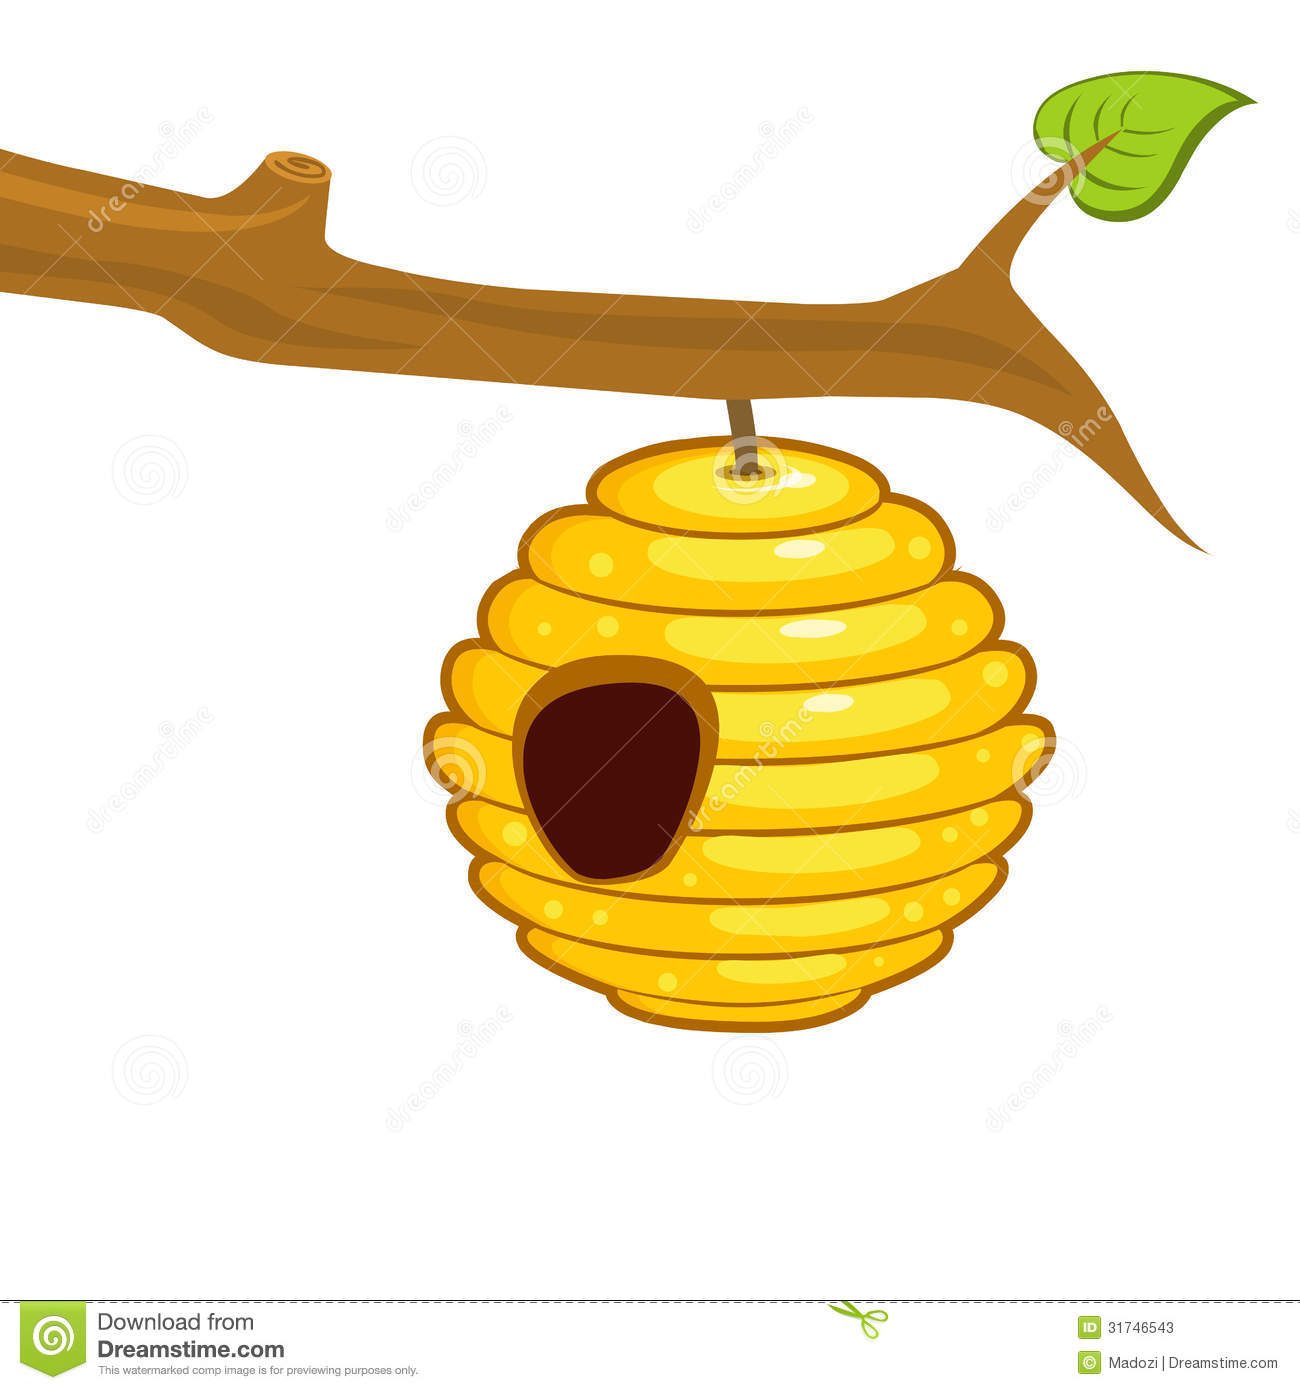 Beehive Clip Art At Vector Cl